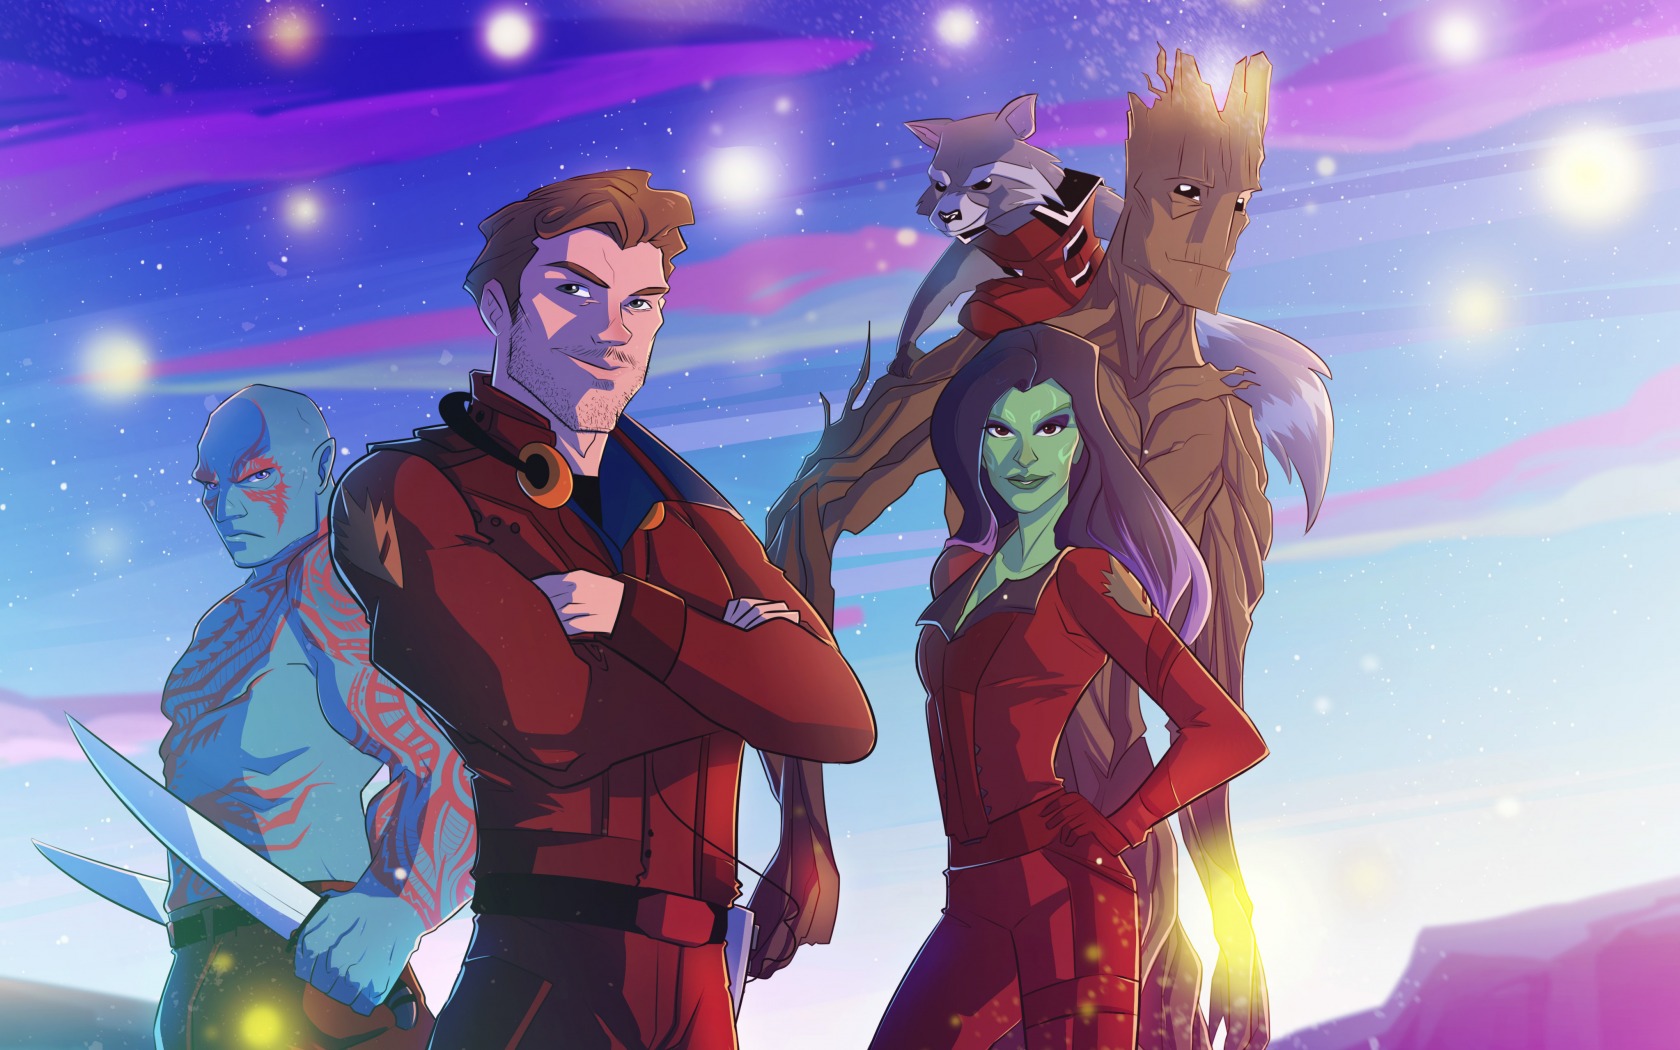 marvel's guardians of the galaxy, tv show, drax the destroyer, gamora, groot, peter quill, rocket raccoon, star lord